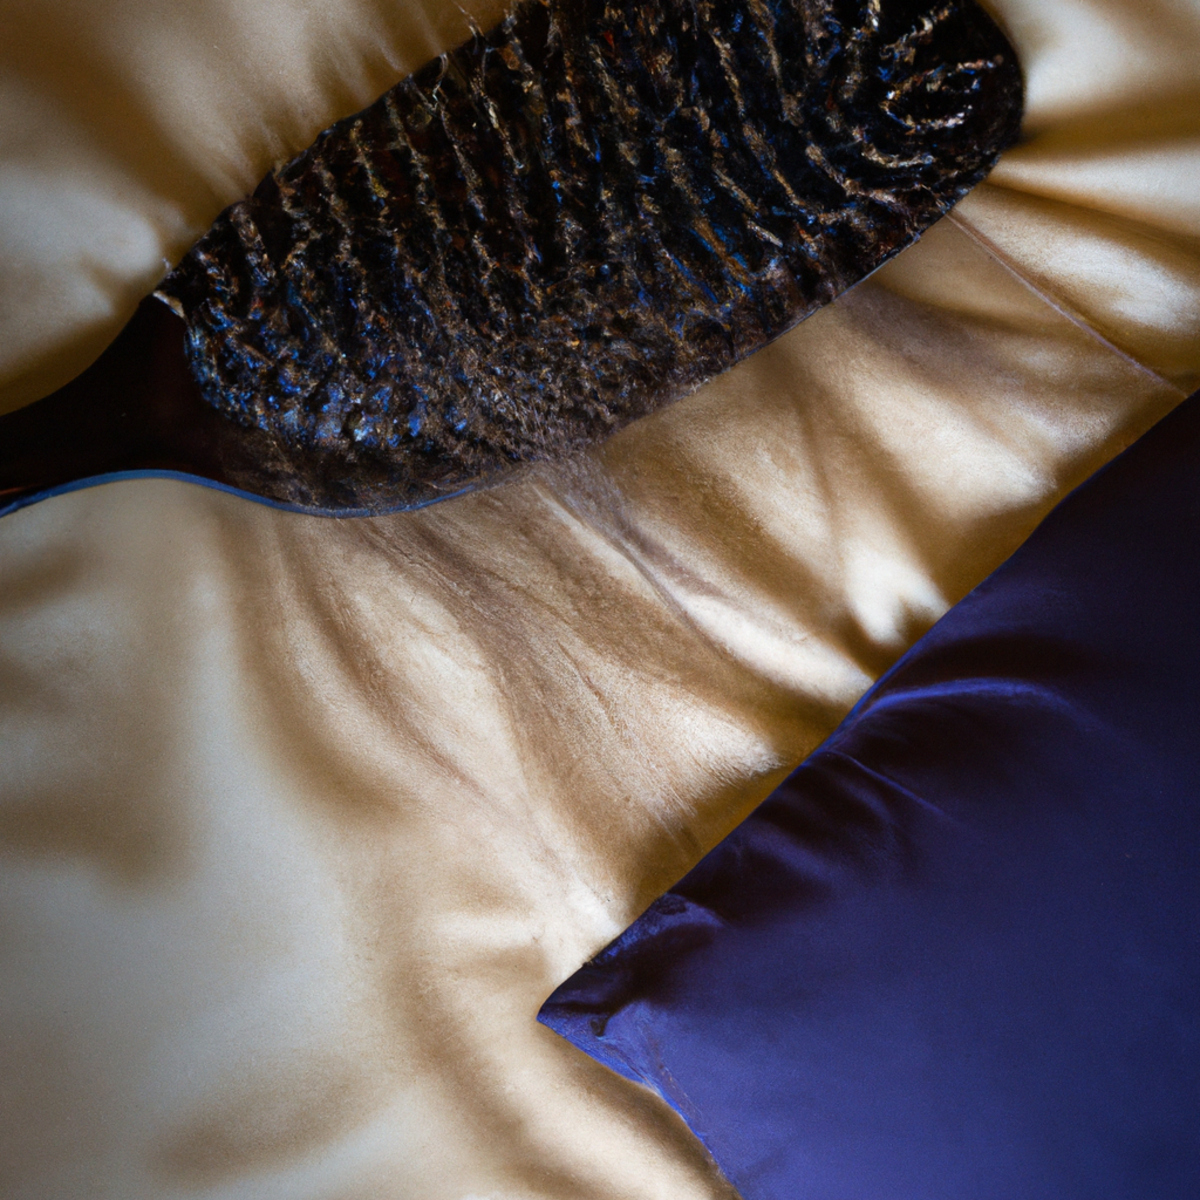 Silk pillowcase, hairbrush, and hair strands - simple and elegant objects central to the article's topic.